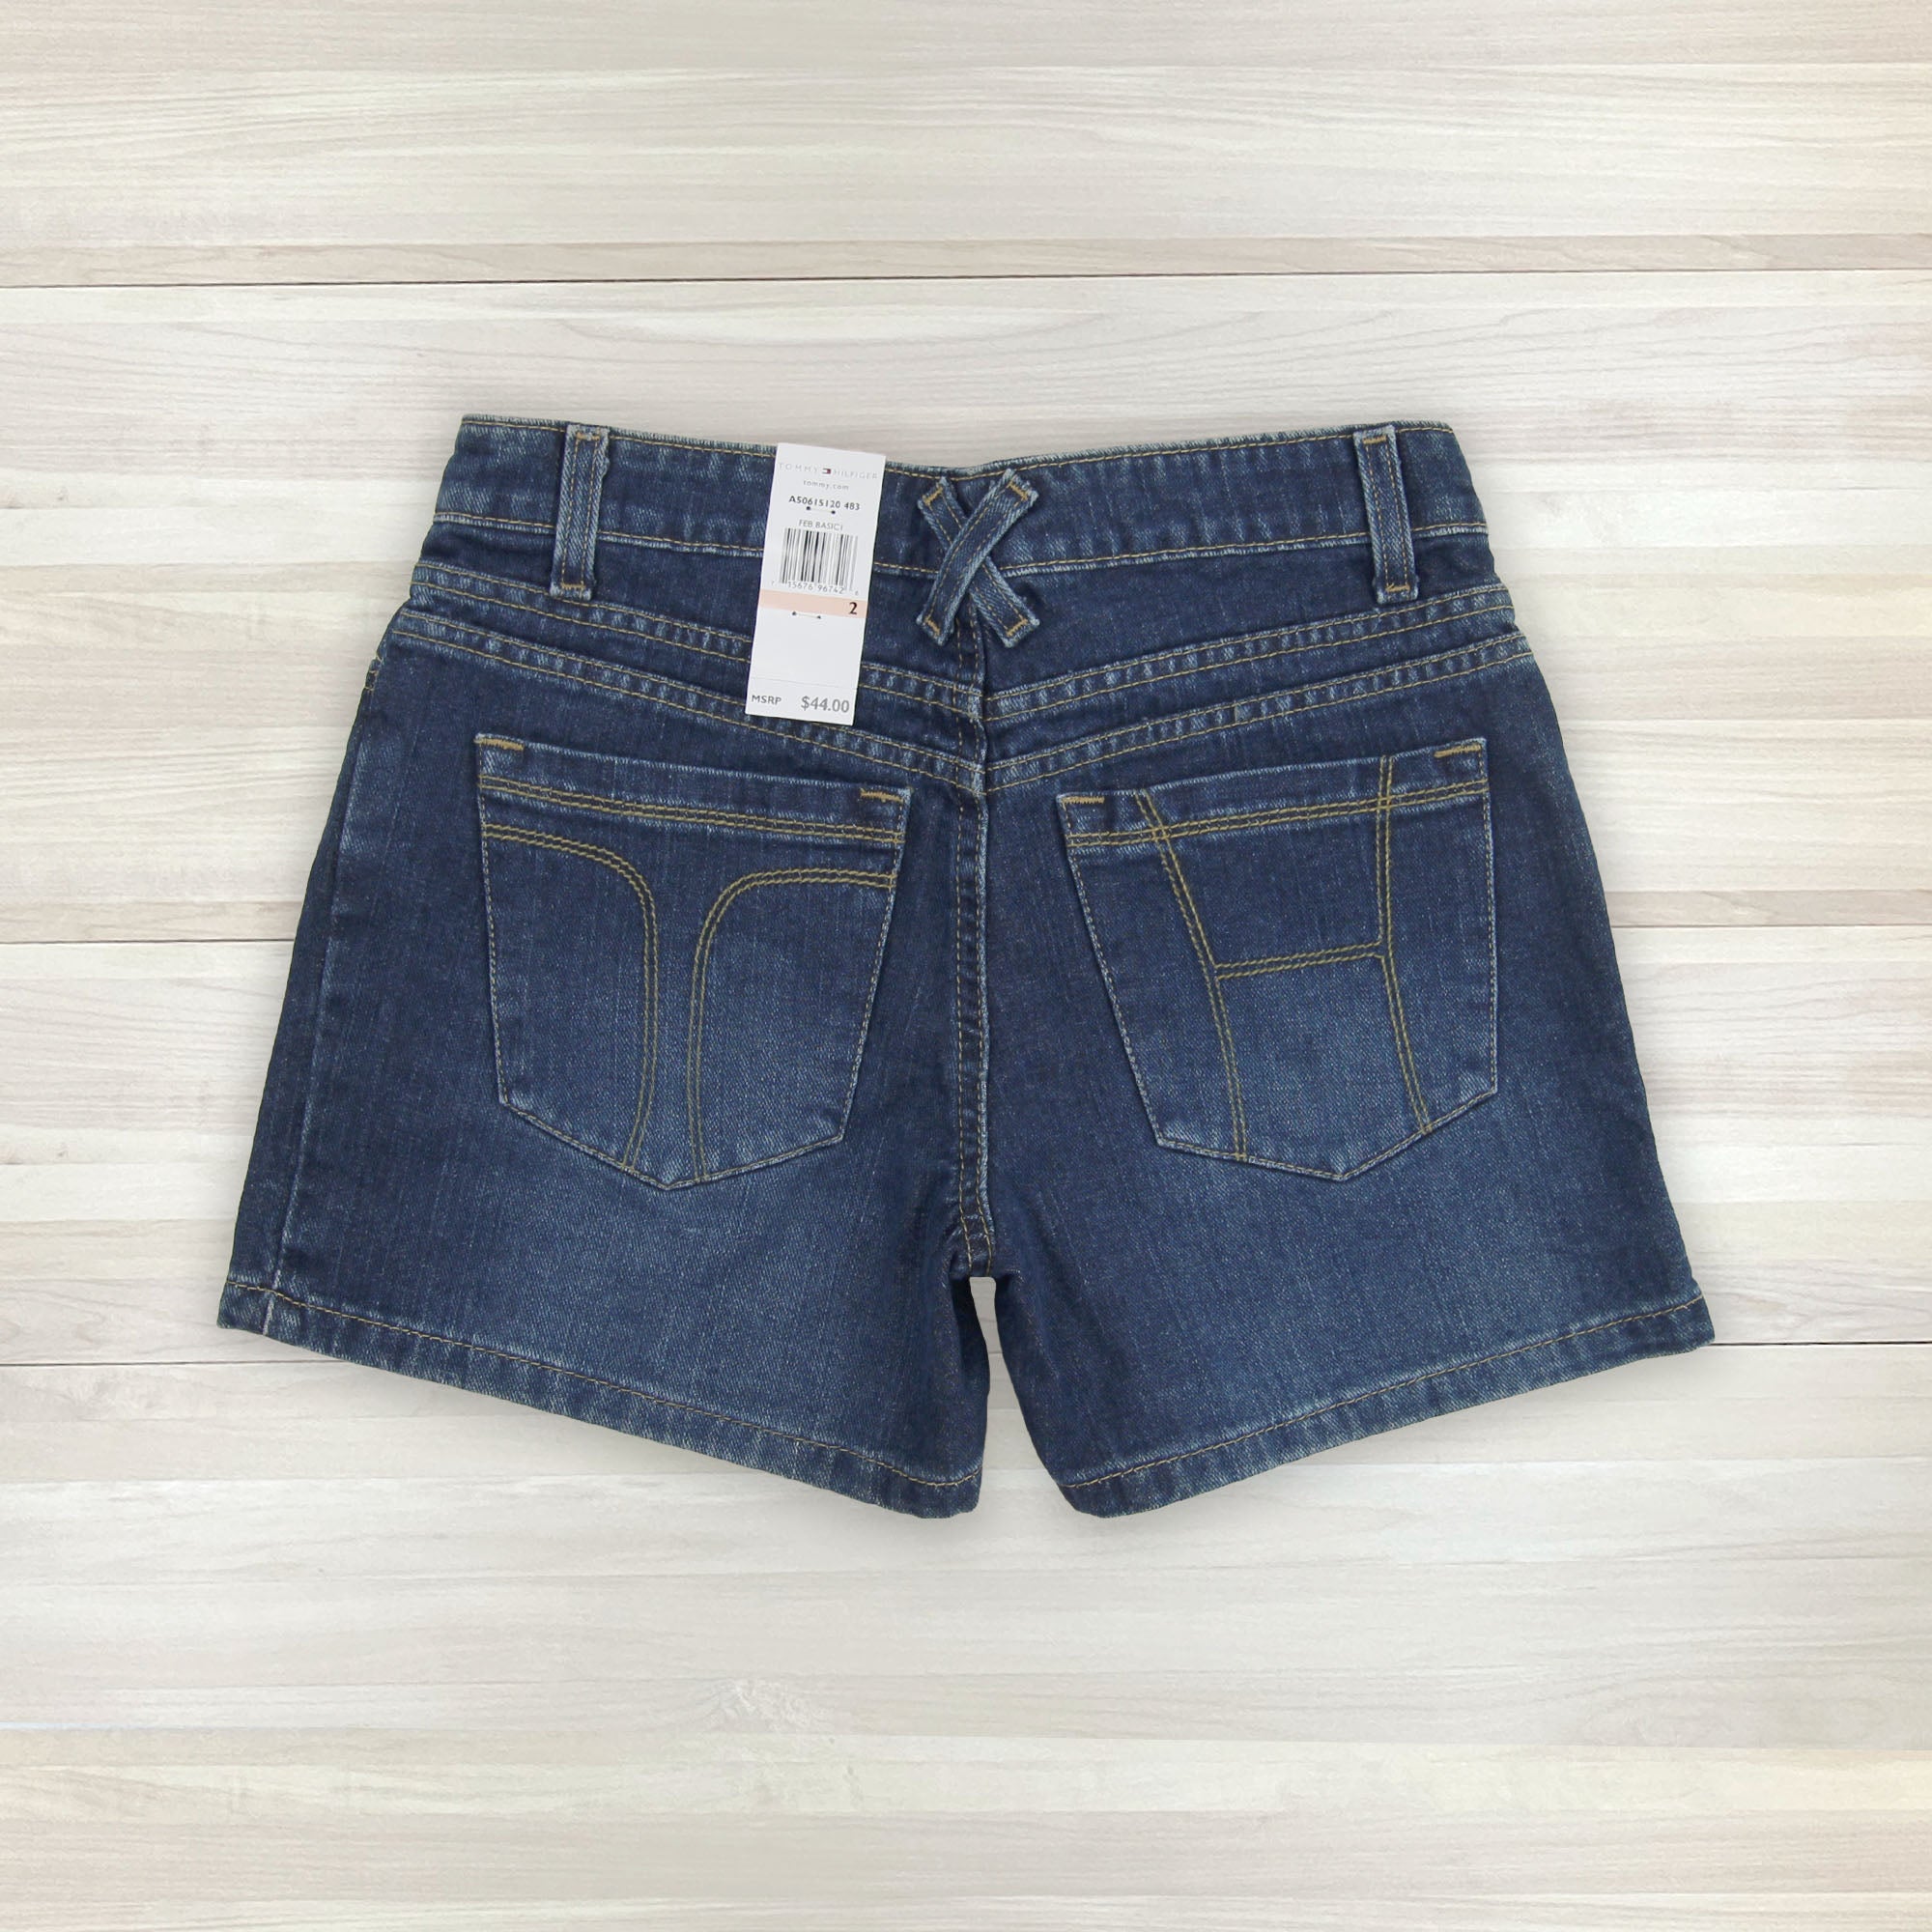 Women's Vintage Tommy Hilfiger Denim Shorts Size 2 New with Tags - 0